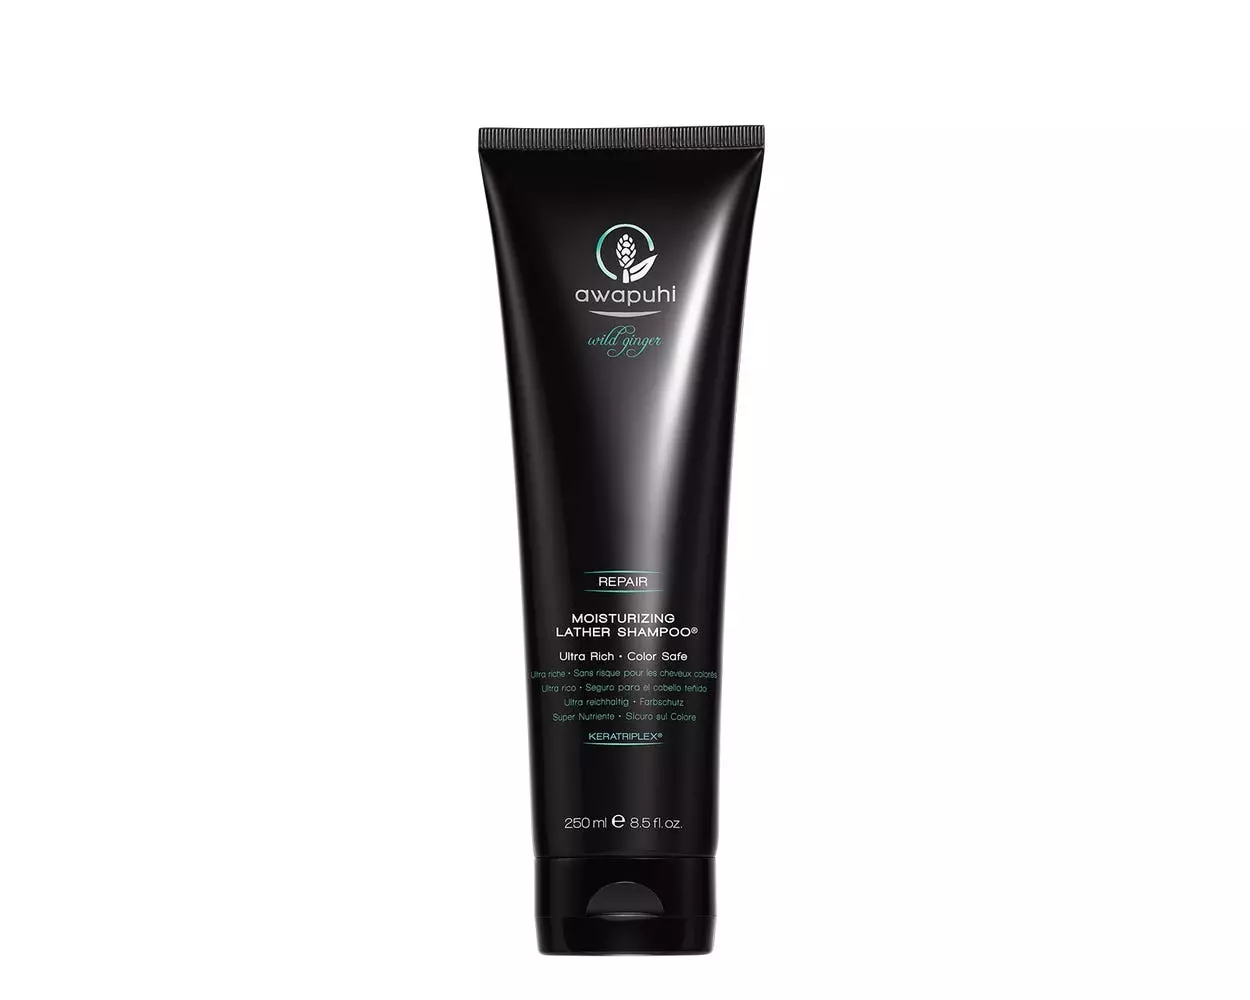 Paul Mitchell Awapuhi Wild Ginger Moisturizing Lather Shampoo, Ultra Rich, Color-Safe Formula, For Dry, Damaged + Color-Treated Hair 8.5 Fl Oz (Pack of 1)